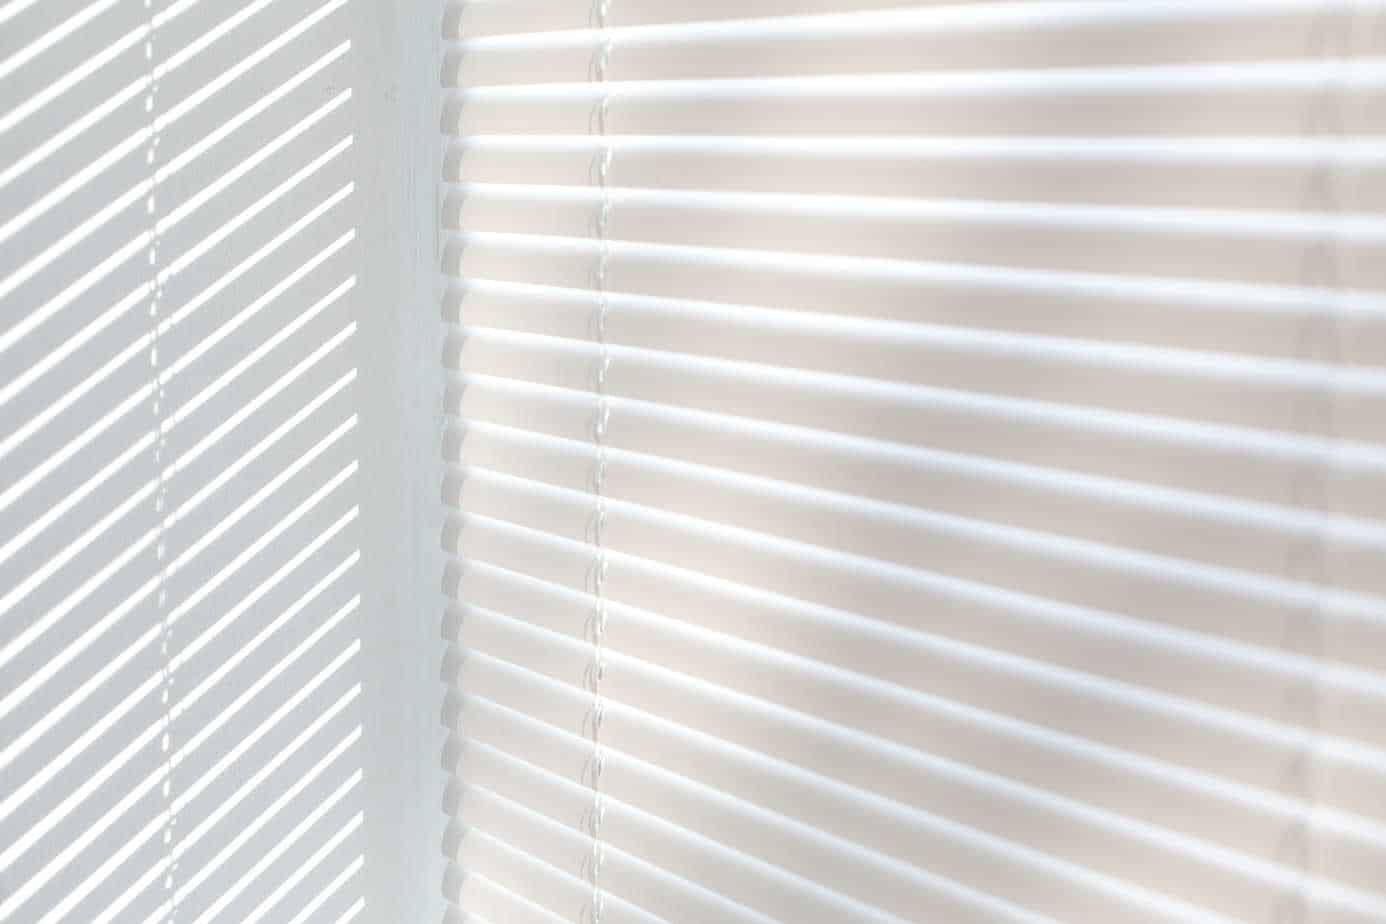 Beautiful Blinds in a Home